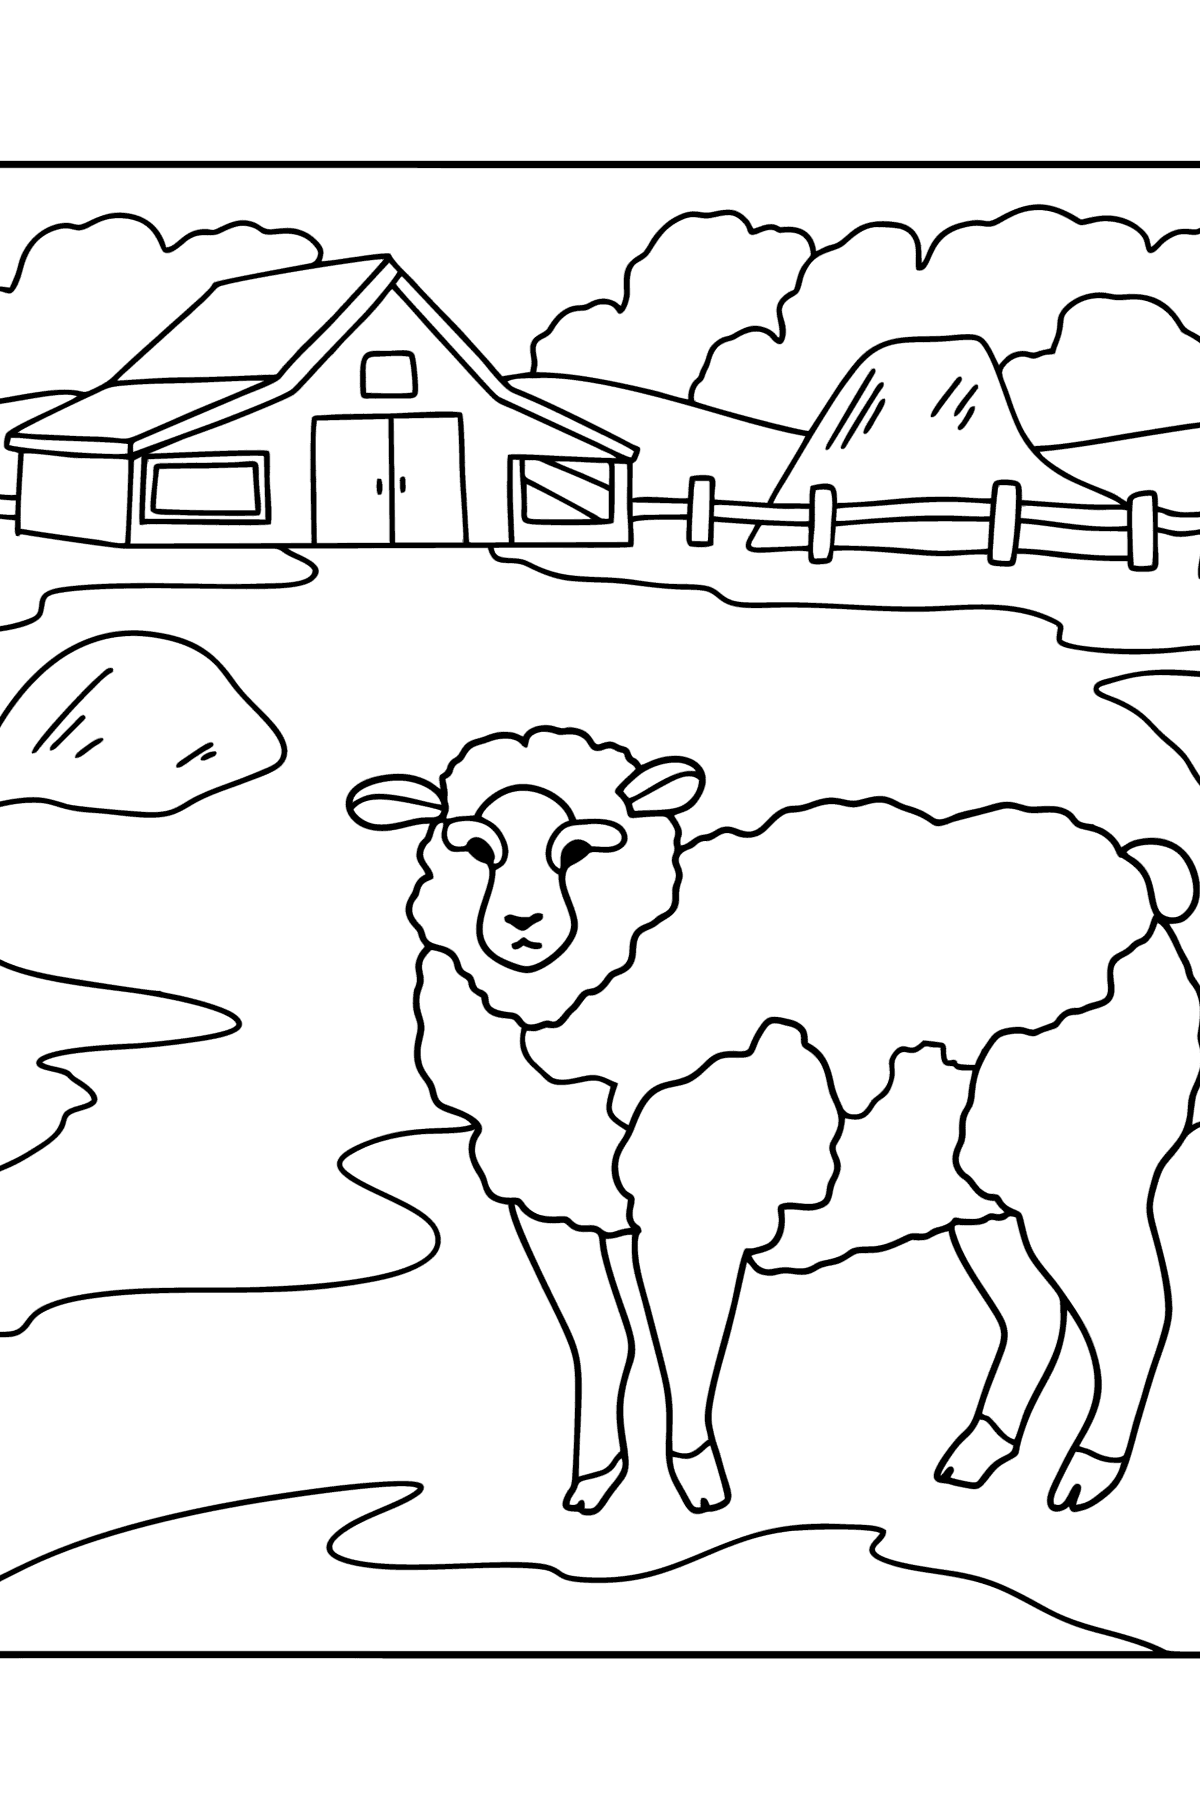 Farm coloring page - Coloring Pages for Kids